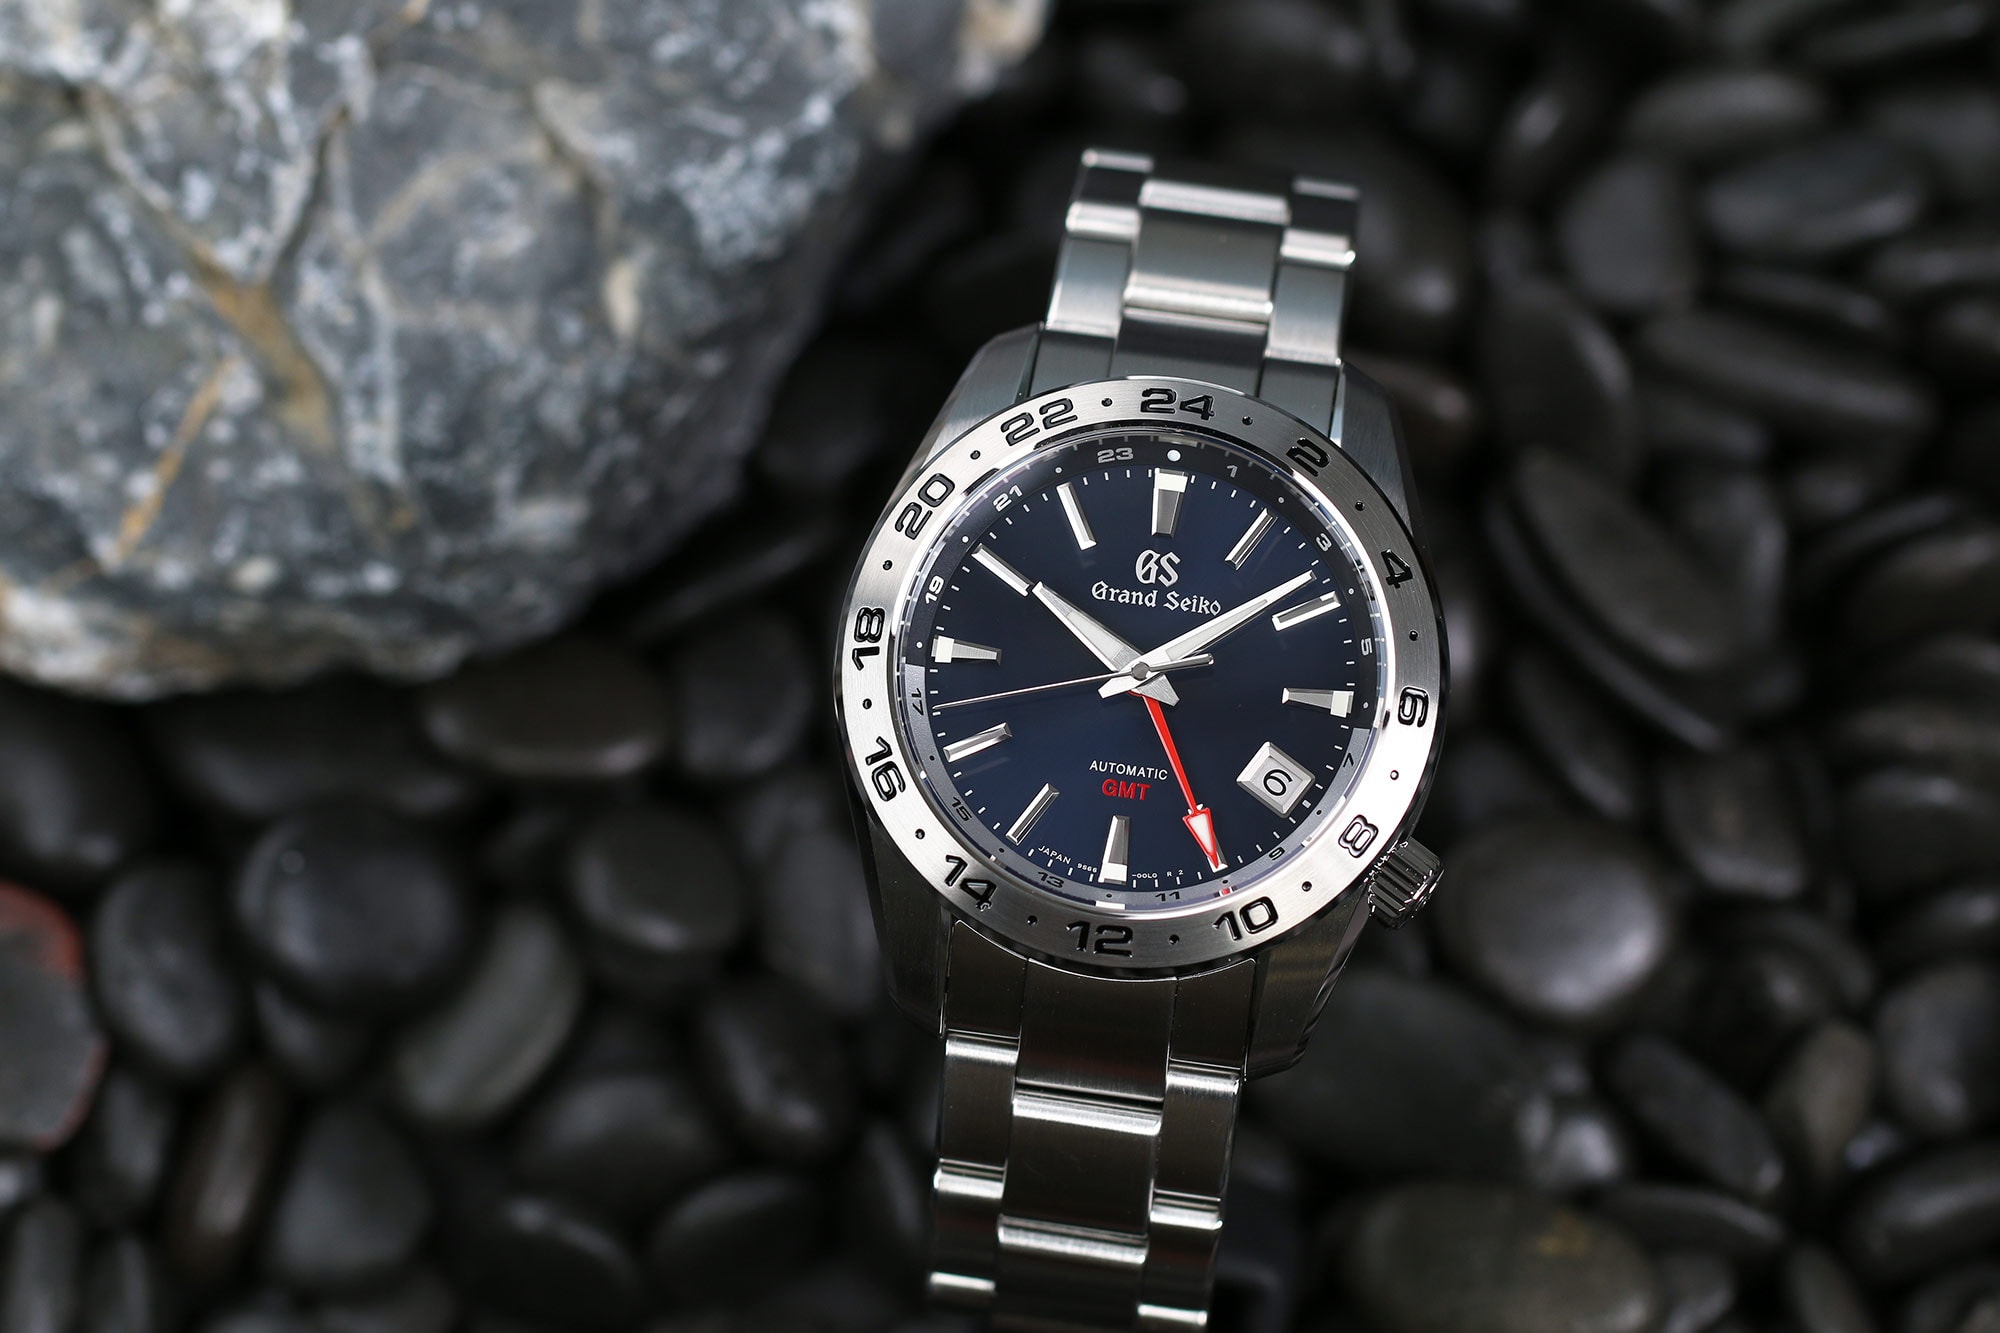 Grand Seiko’s Latest Sporty GMT Puts a Familiar Style in a New Package